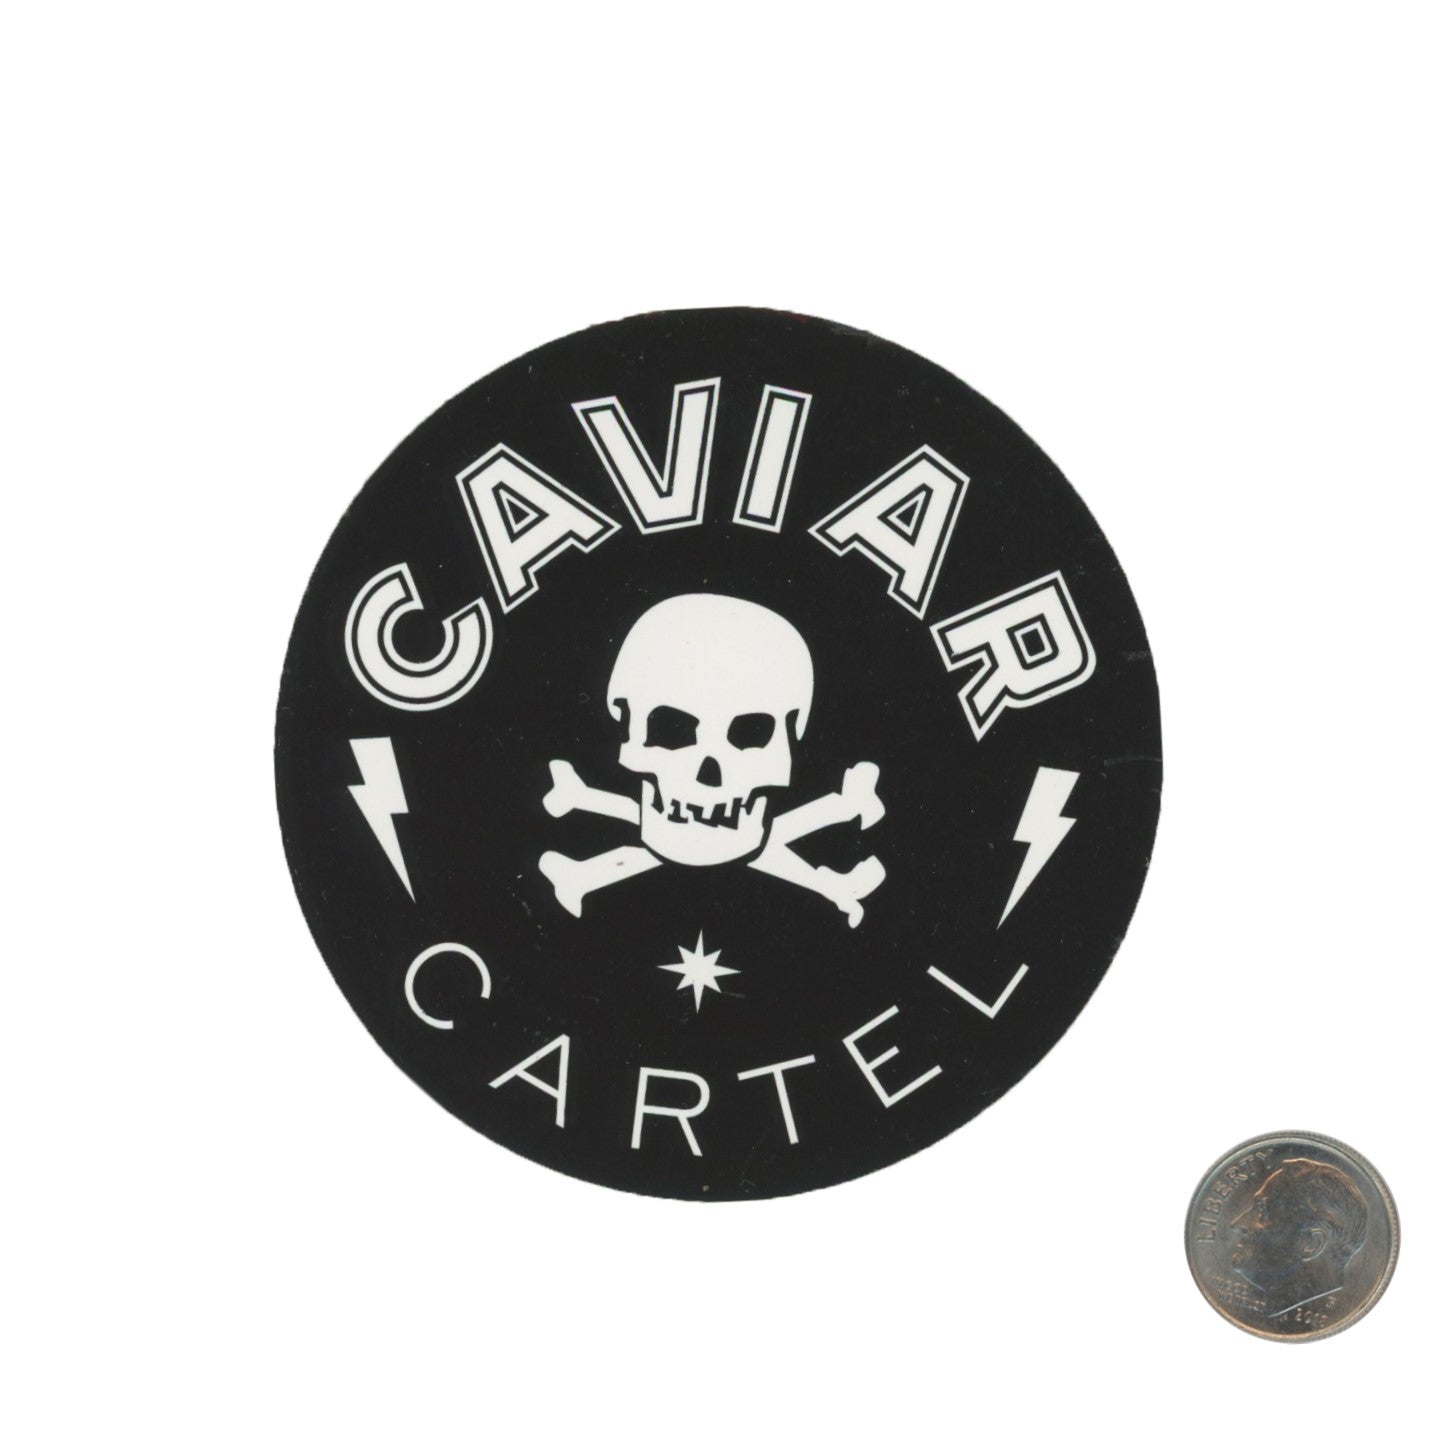 Caviar Cartel Skull And Crossbones Sticker with dime